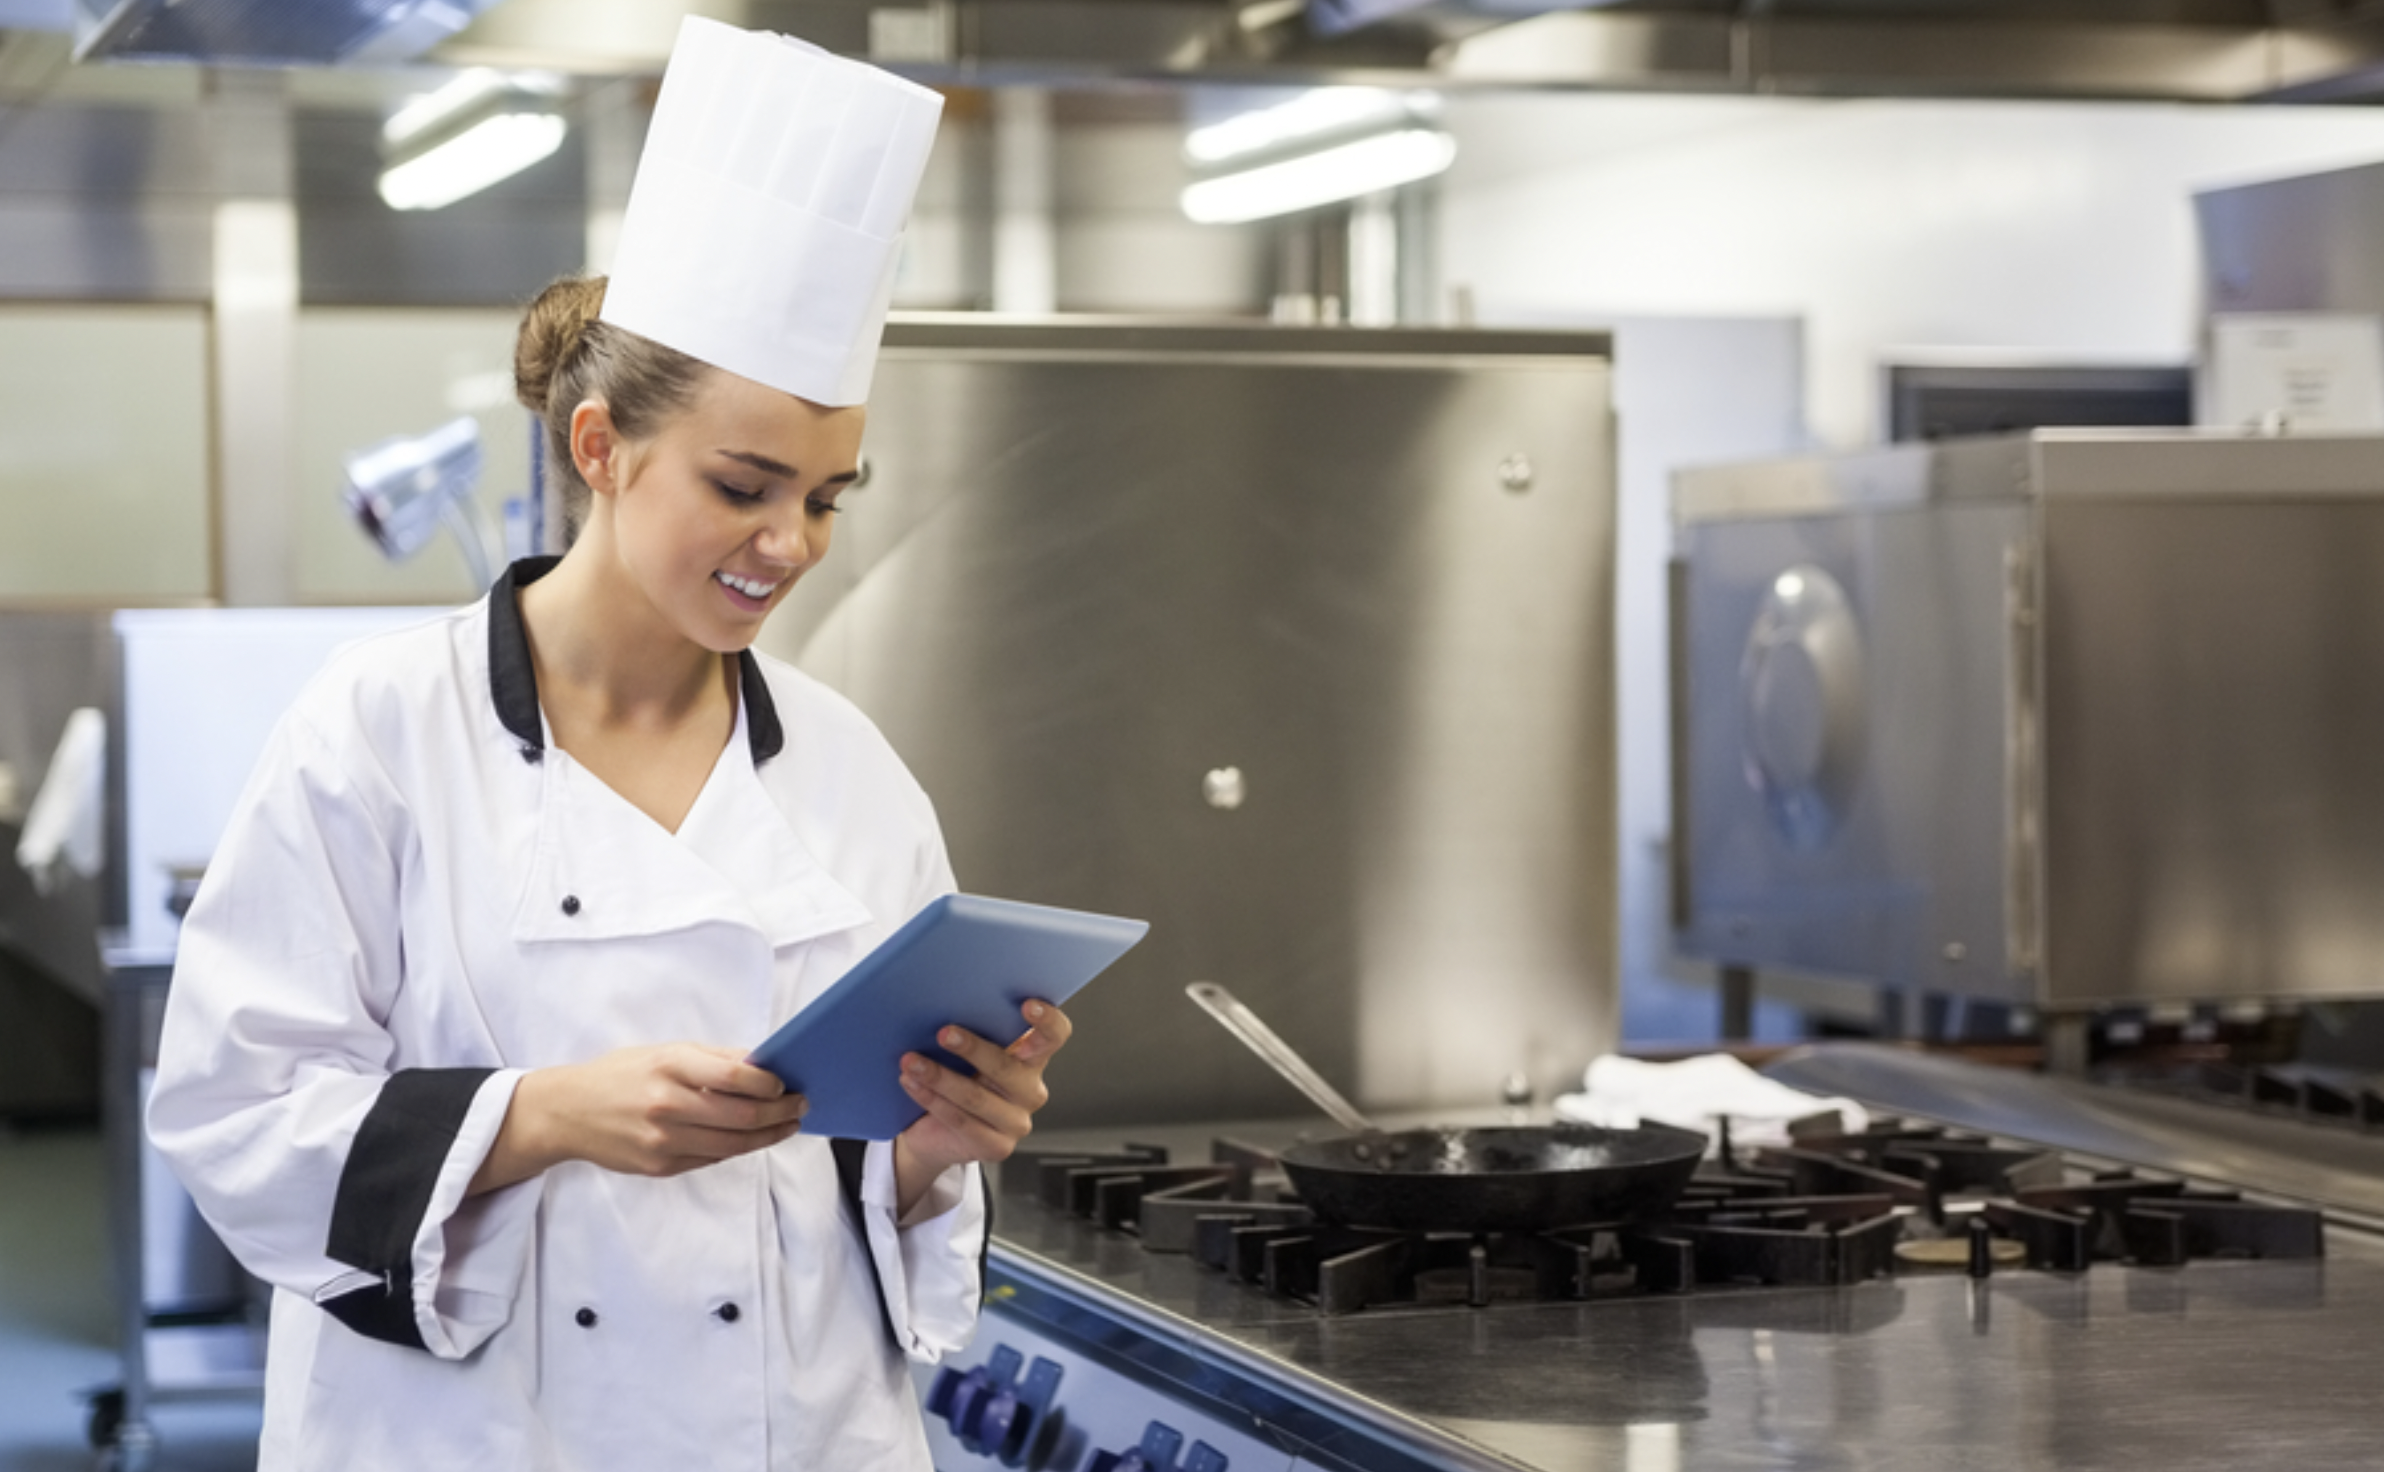 4 Latest Catering Equipment Technologies to Keep an Eye On